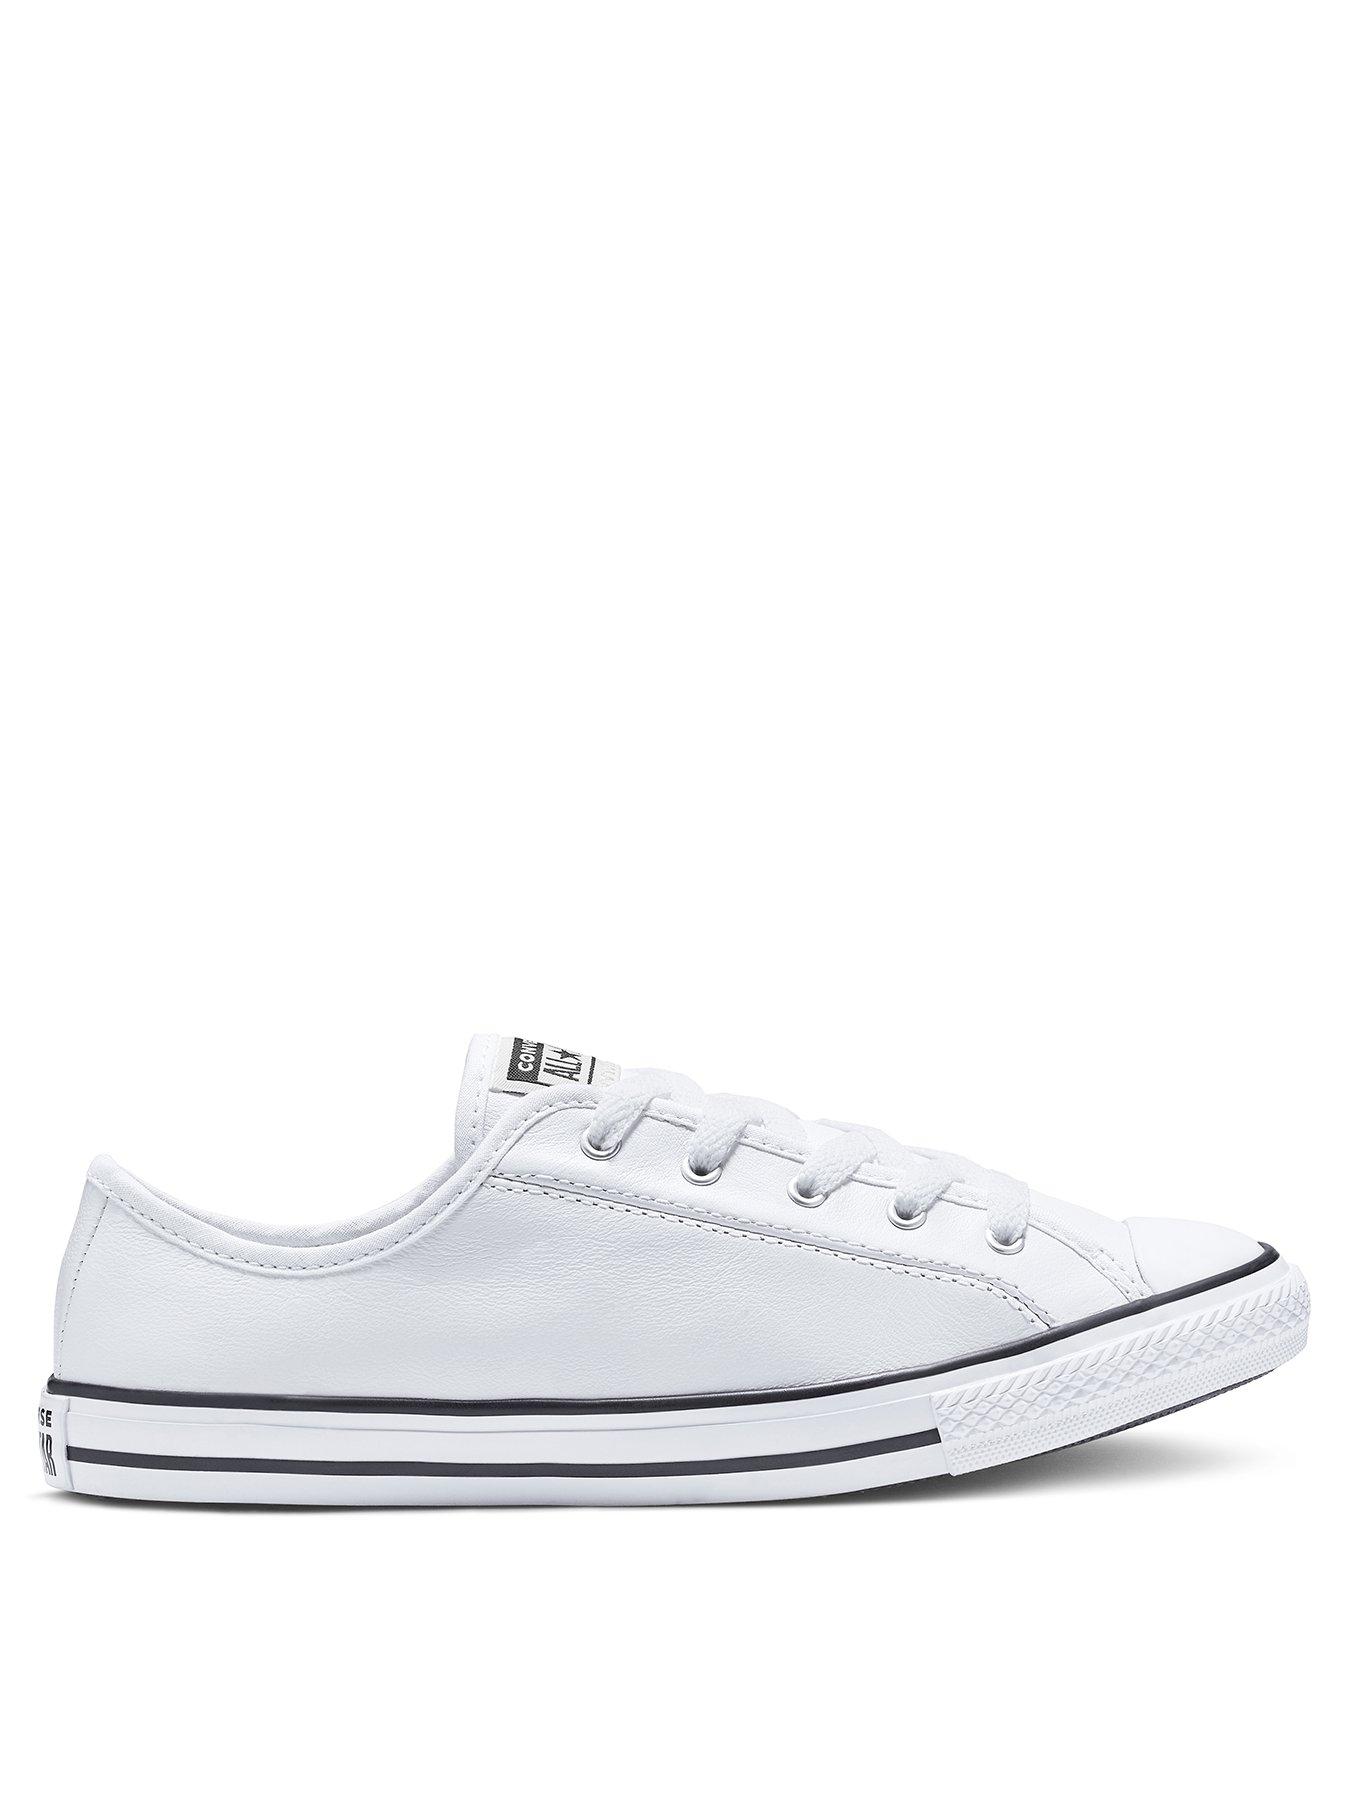 Converse Chuck Taylor All Star Leather Dainty Ox Plimsolls - White ...